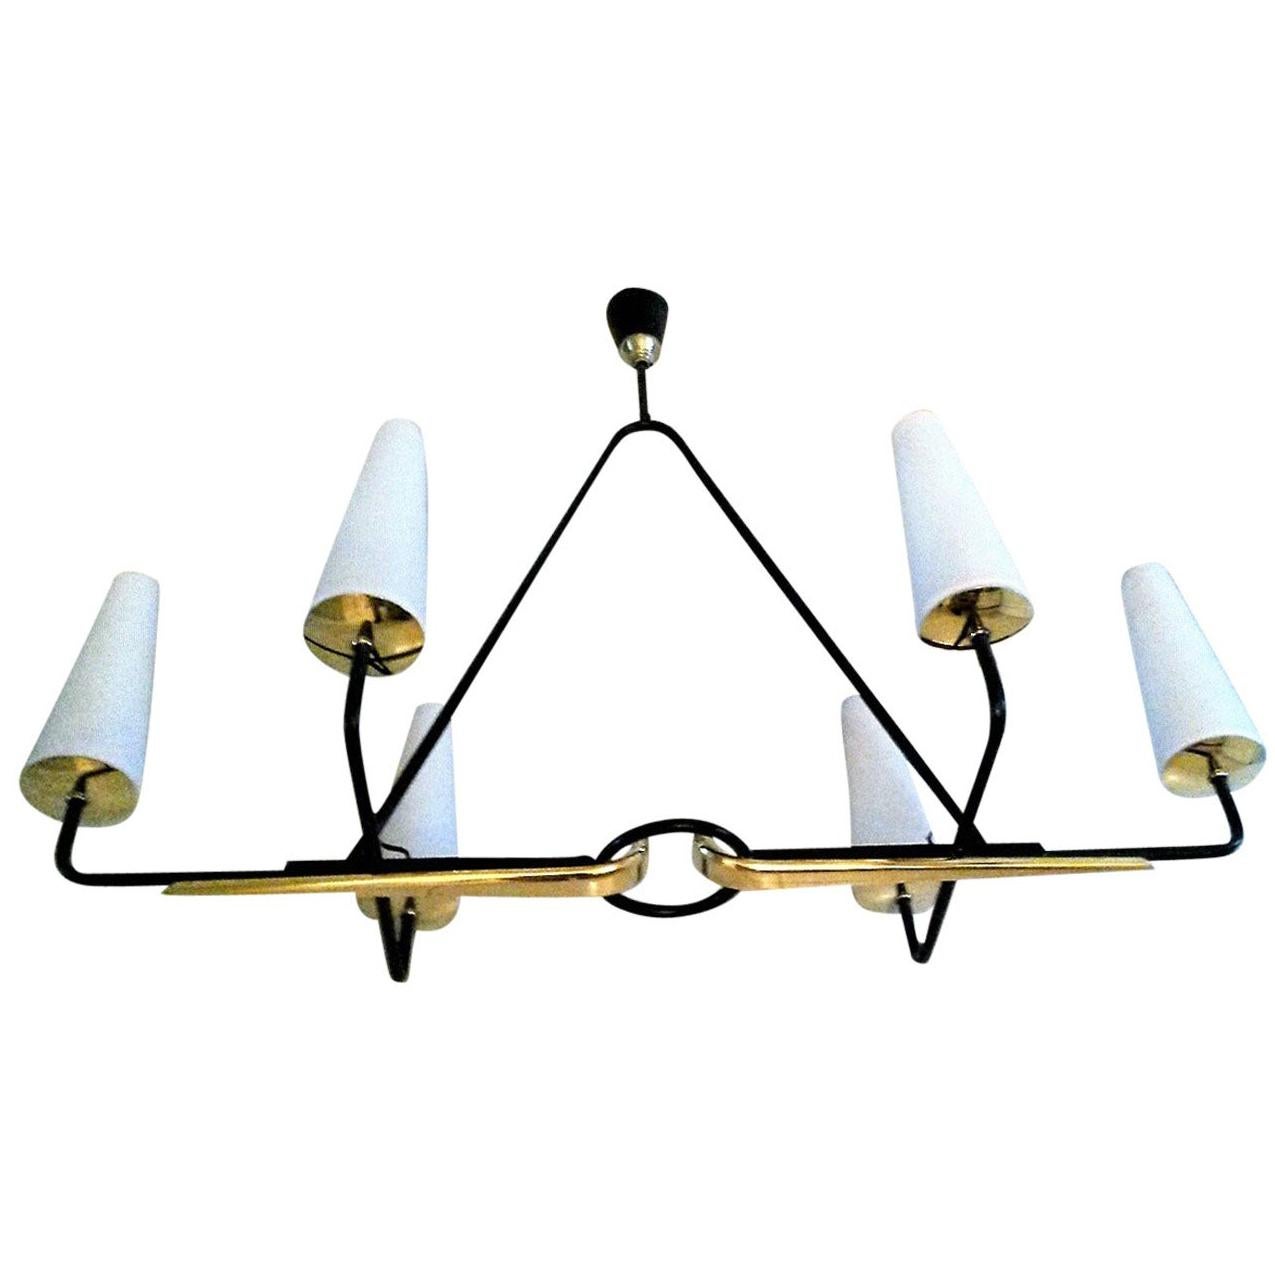 Gorgeous French Mid-Century Modern Lunel Chandelier, Large Size